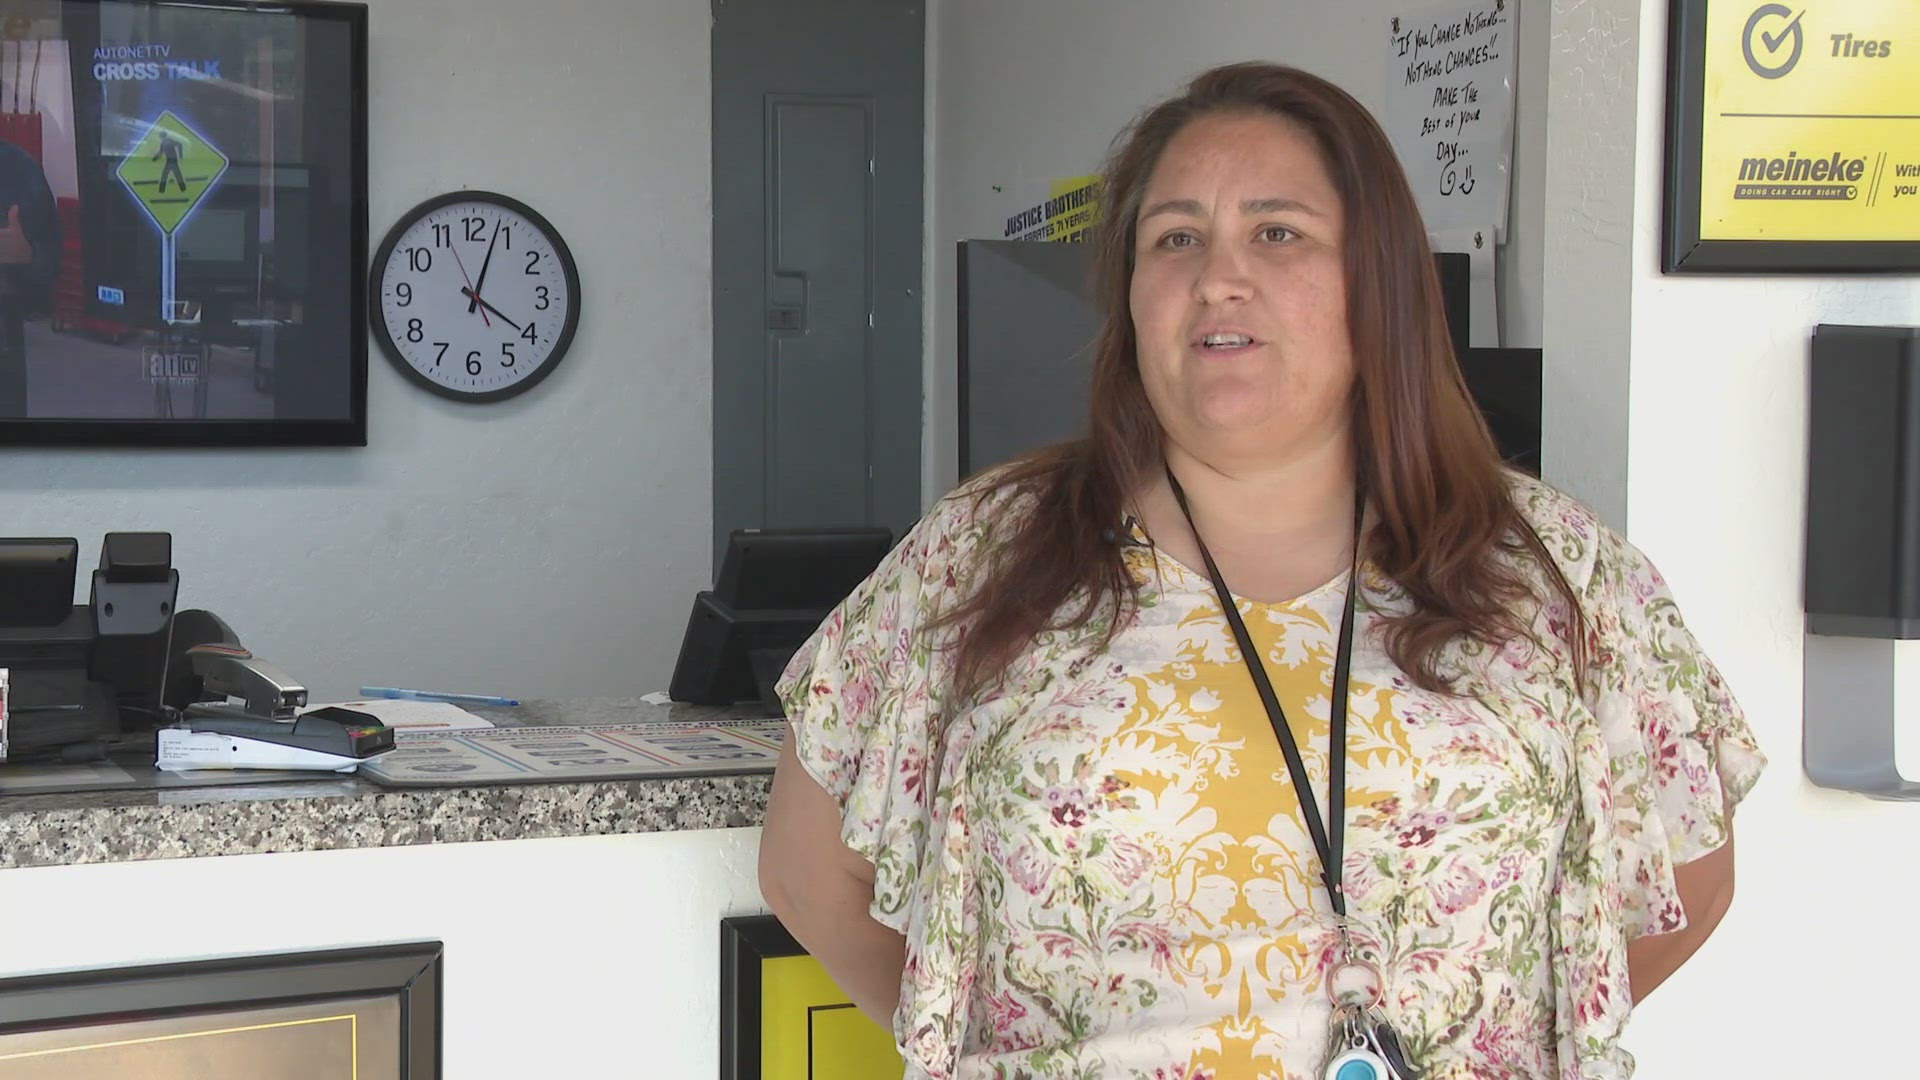 A Valley teacher and single mom relied on United Food Bank to help her get back on her feet. Then a local car shop stepped in to help repair her car as well.